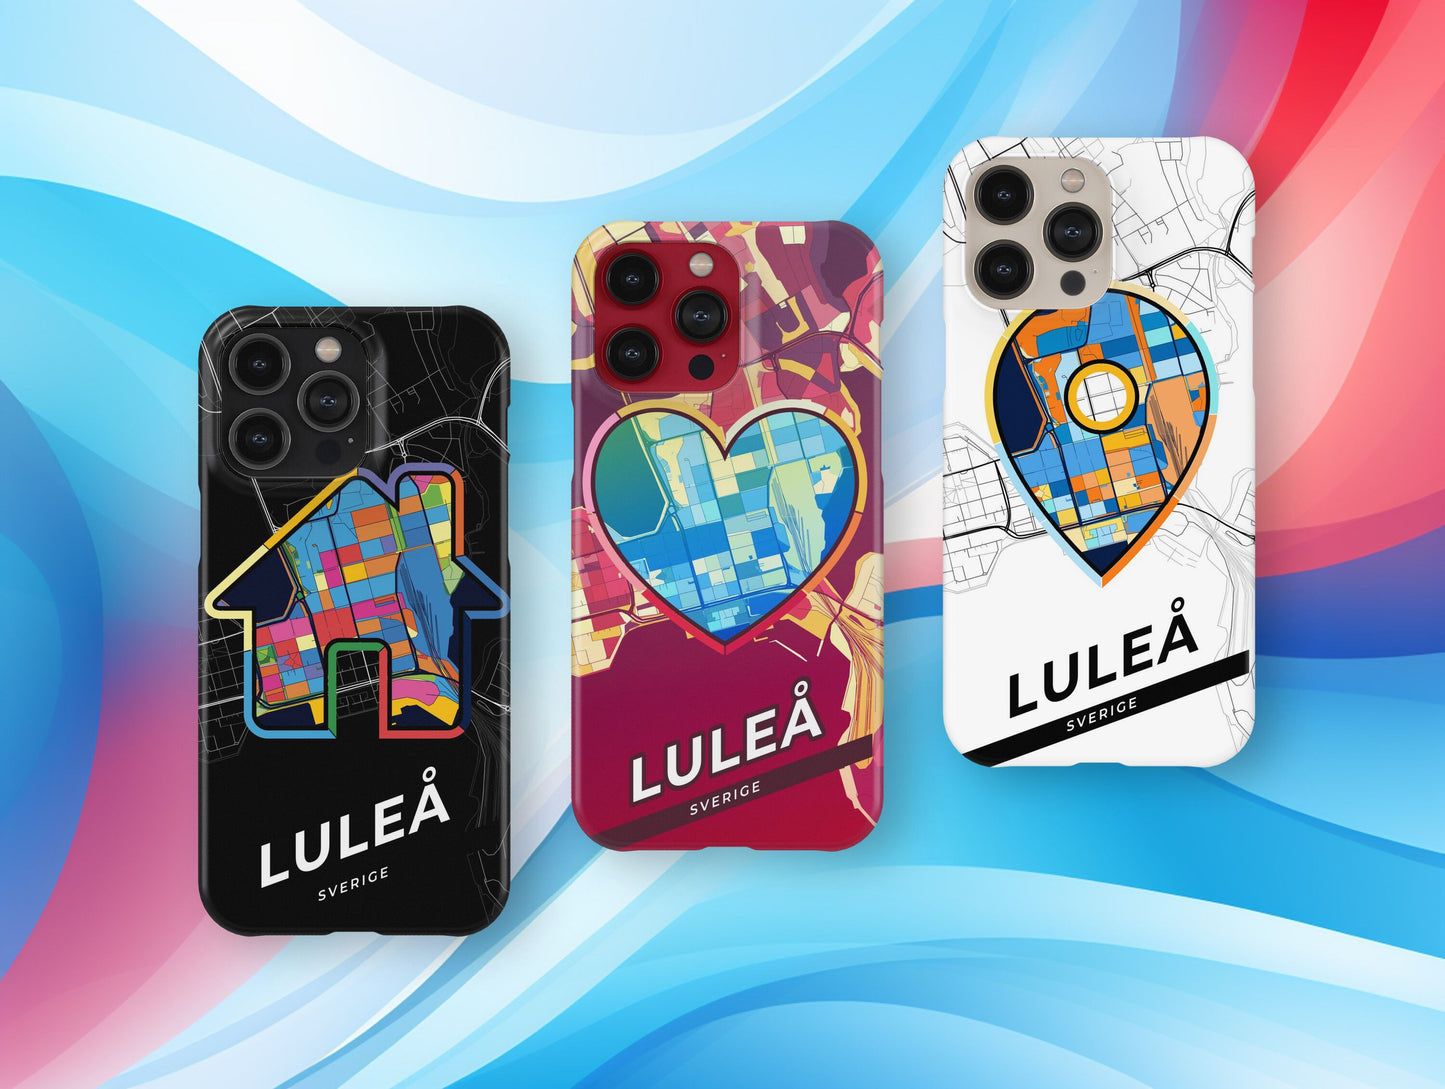 Luleå Sweden slim phone case with colorful icon. Birthday, wedding or housewarming gift. Couple match cases.